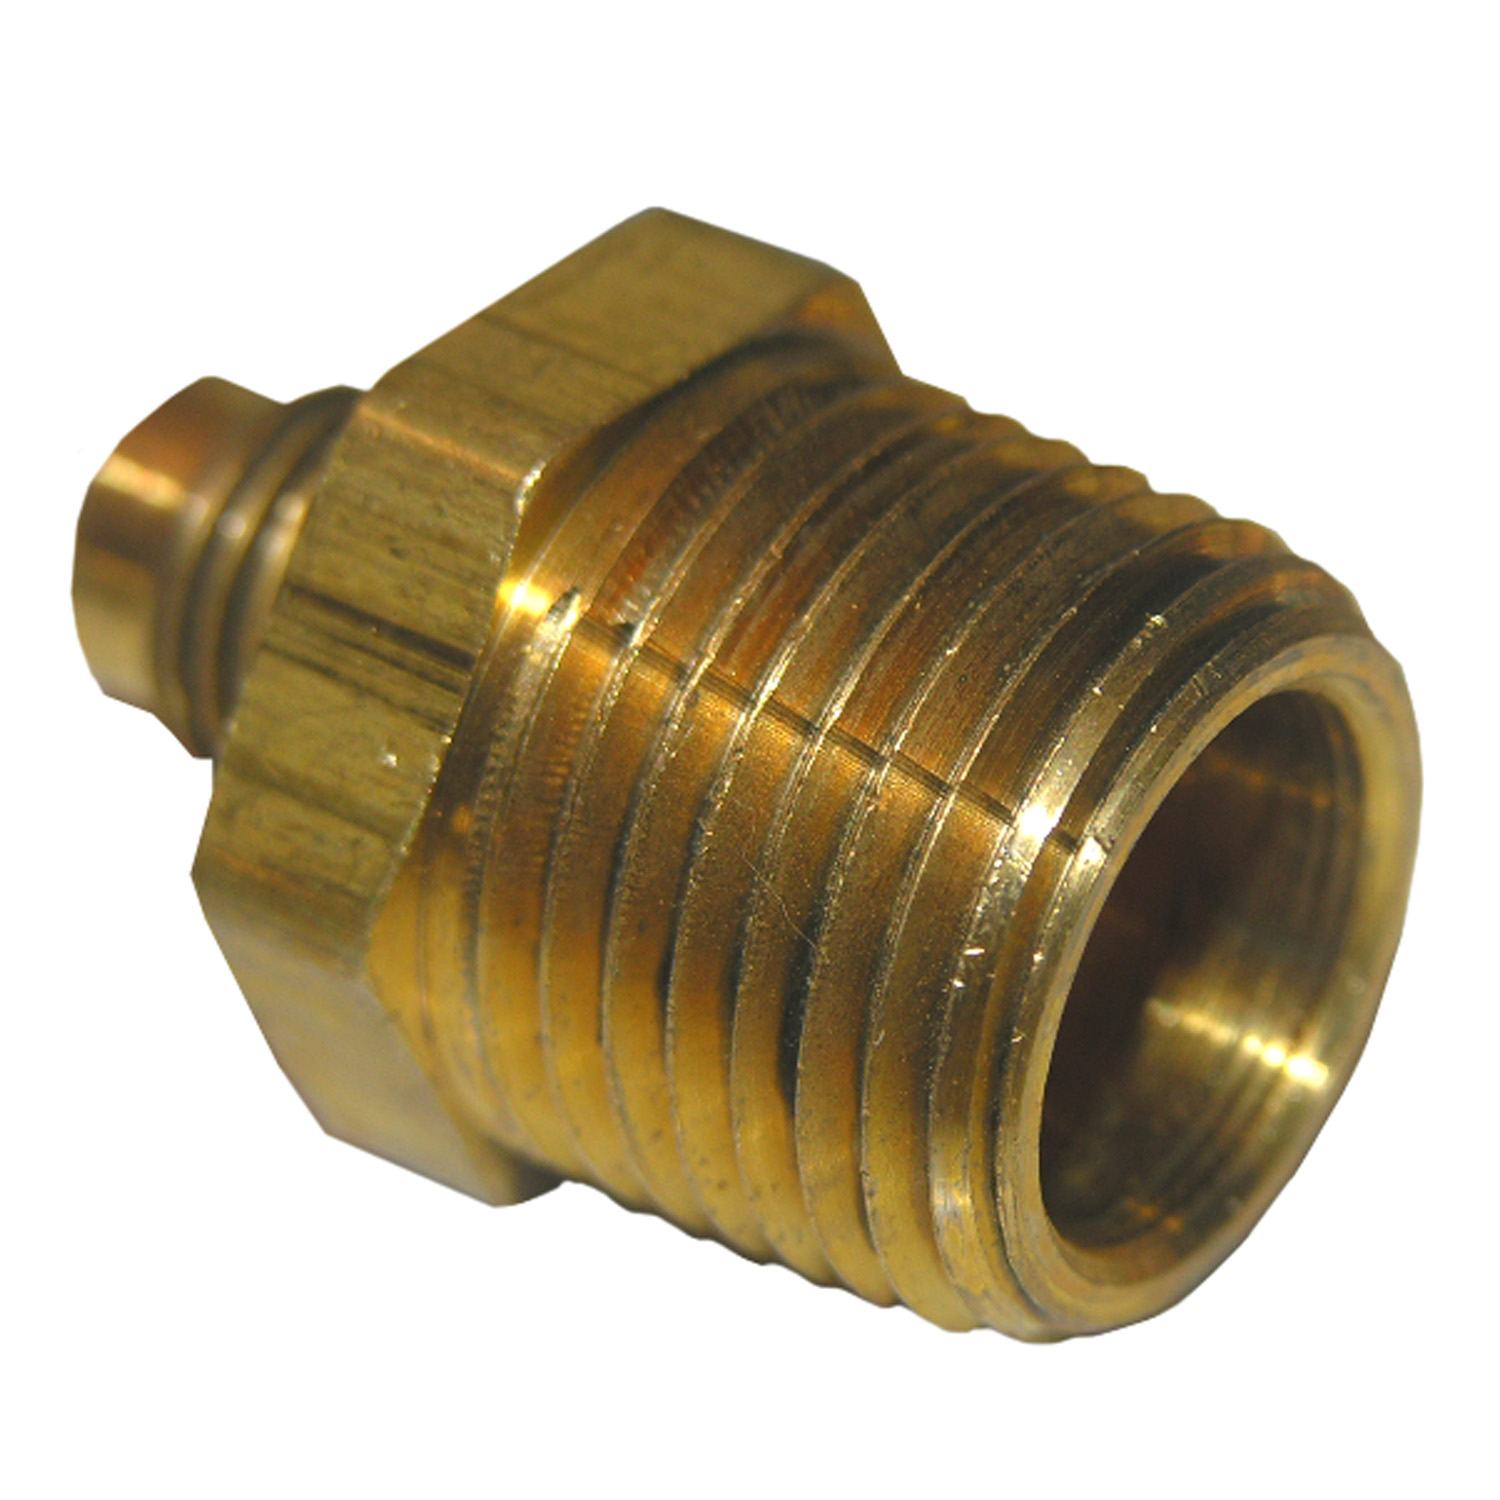 17-4813 Pipe Adapter, 1/4 x 3/8 in, Male Flare x MPT, Brass, 1400 psi Pressure